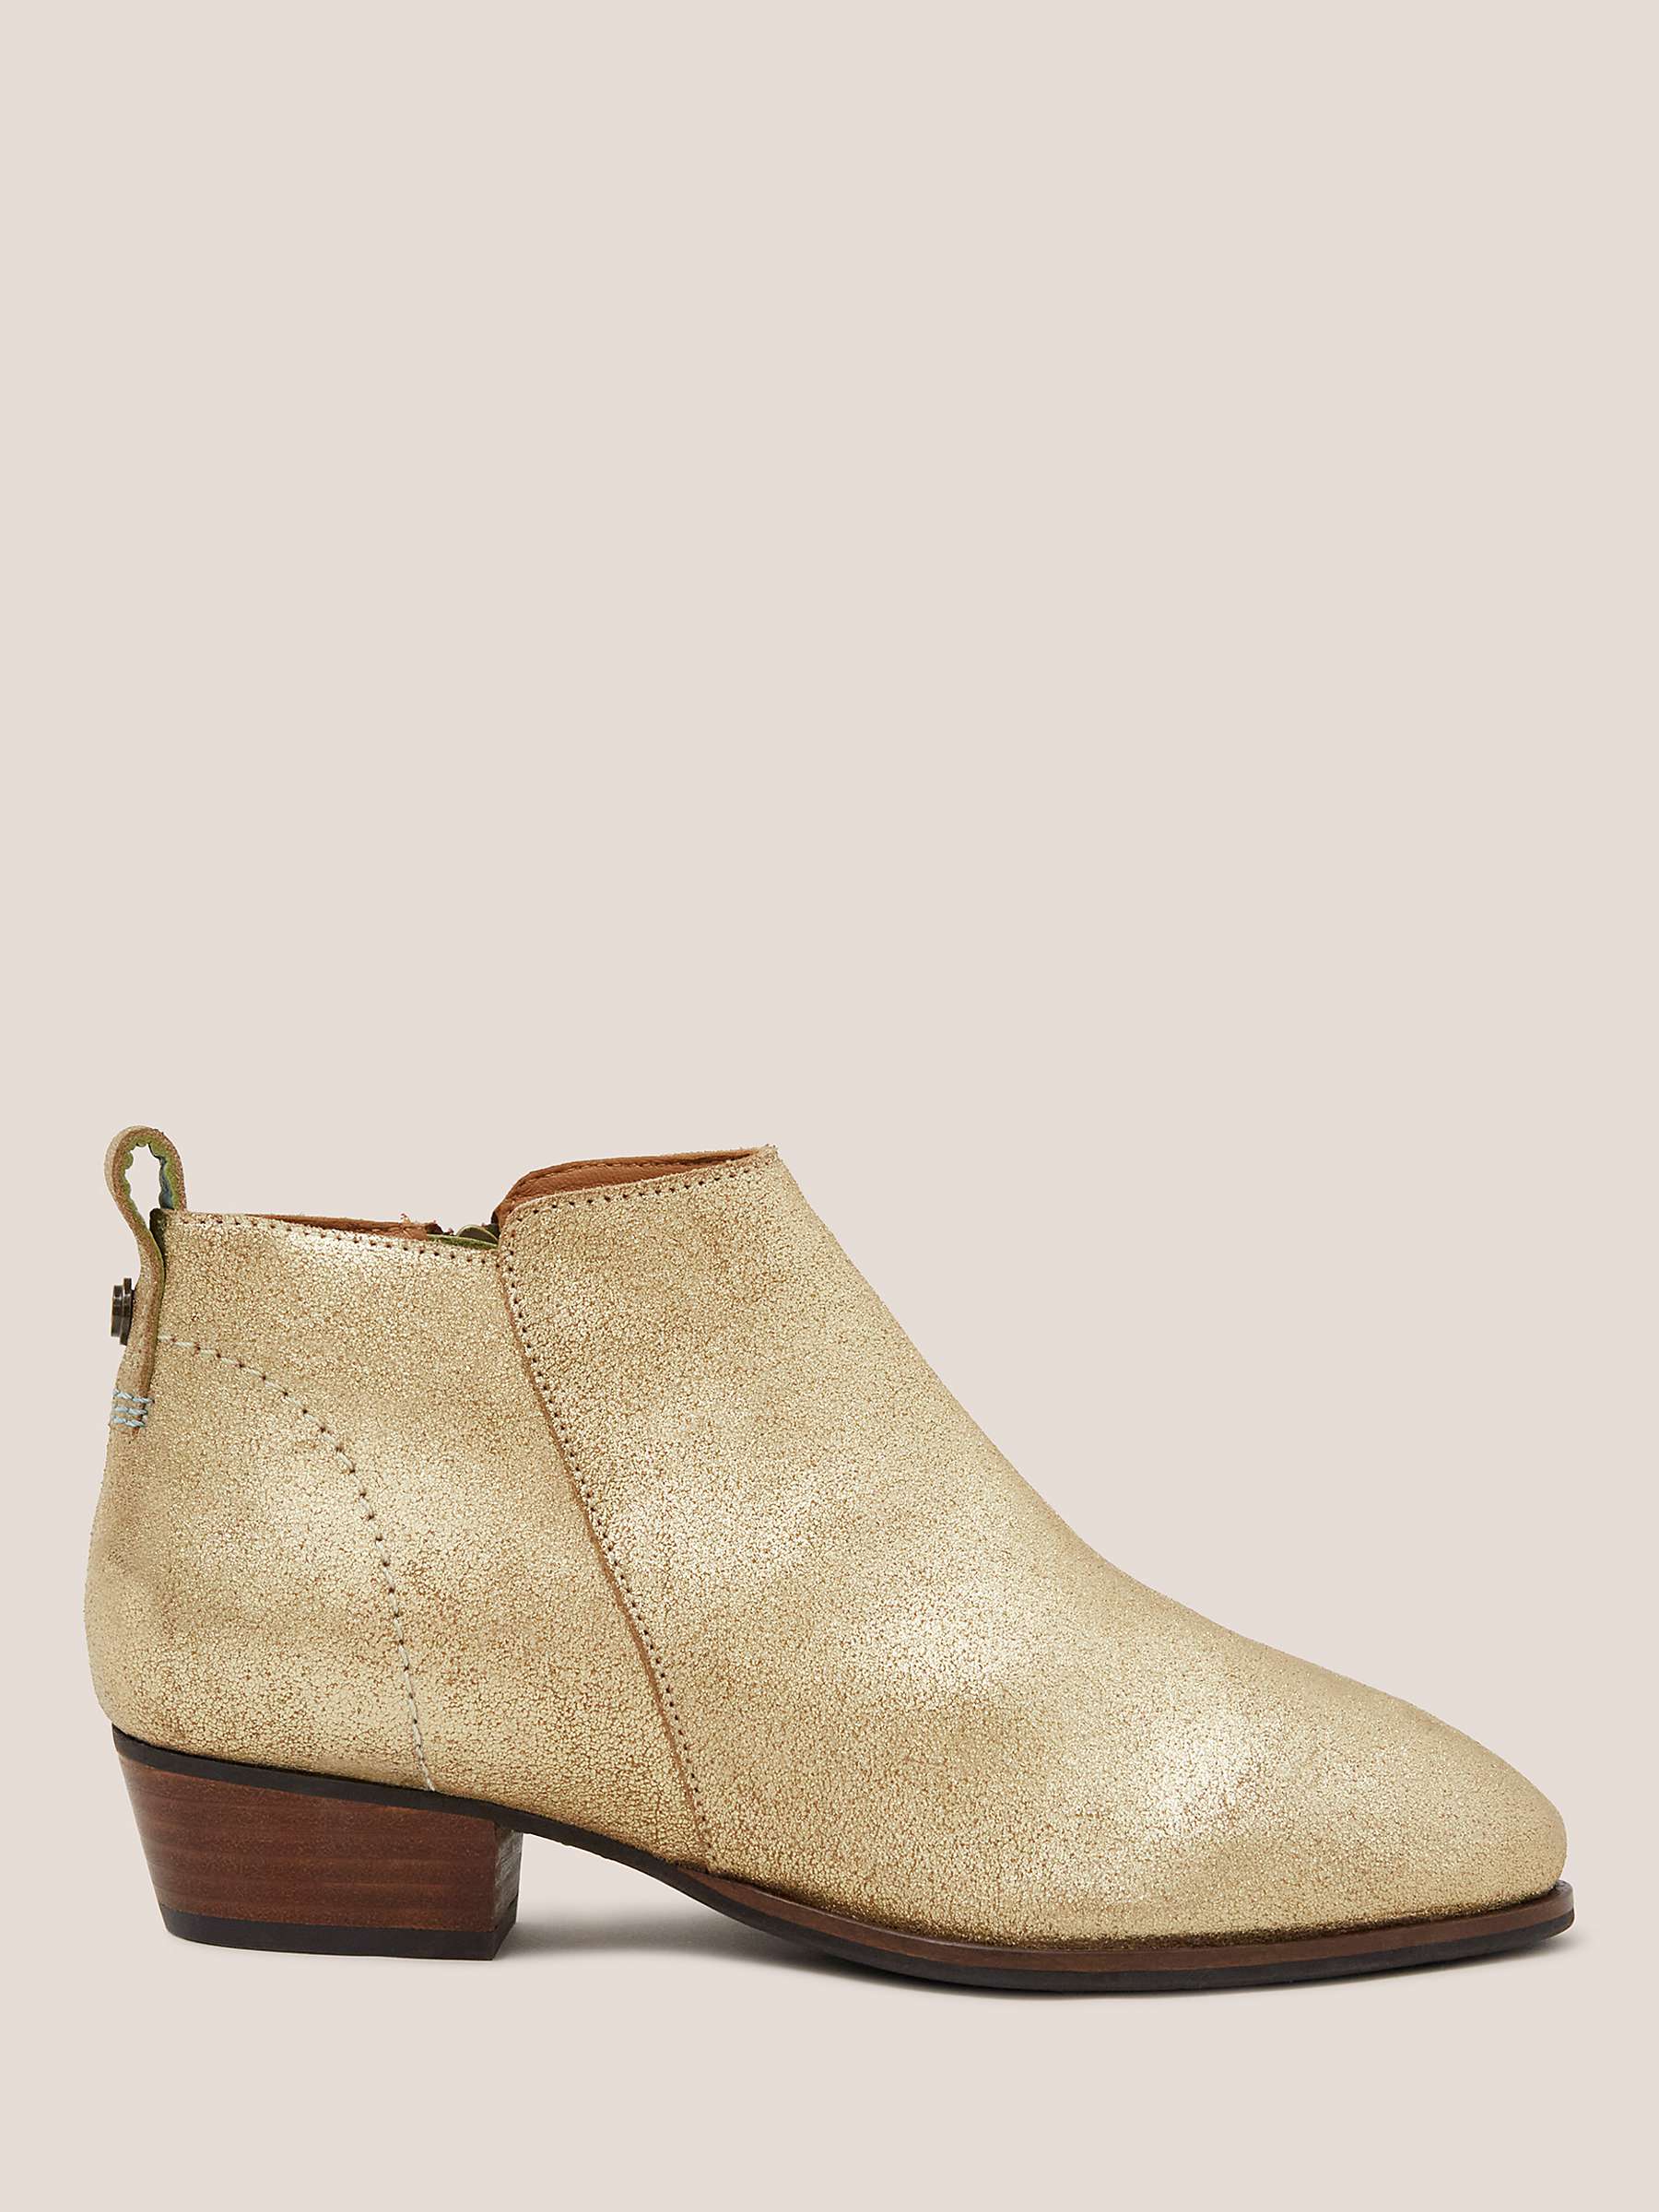 Buy White Stuff Willow Leather Ankle Boots Online at johnlewis.com